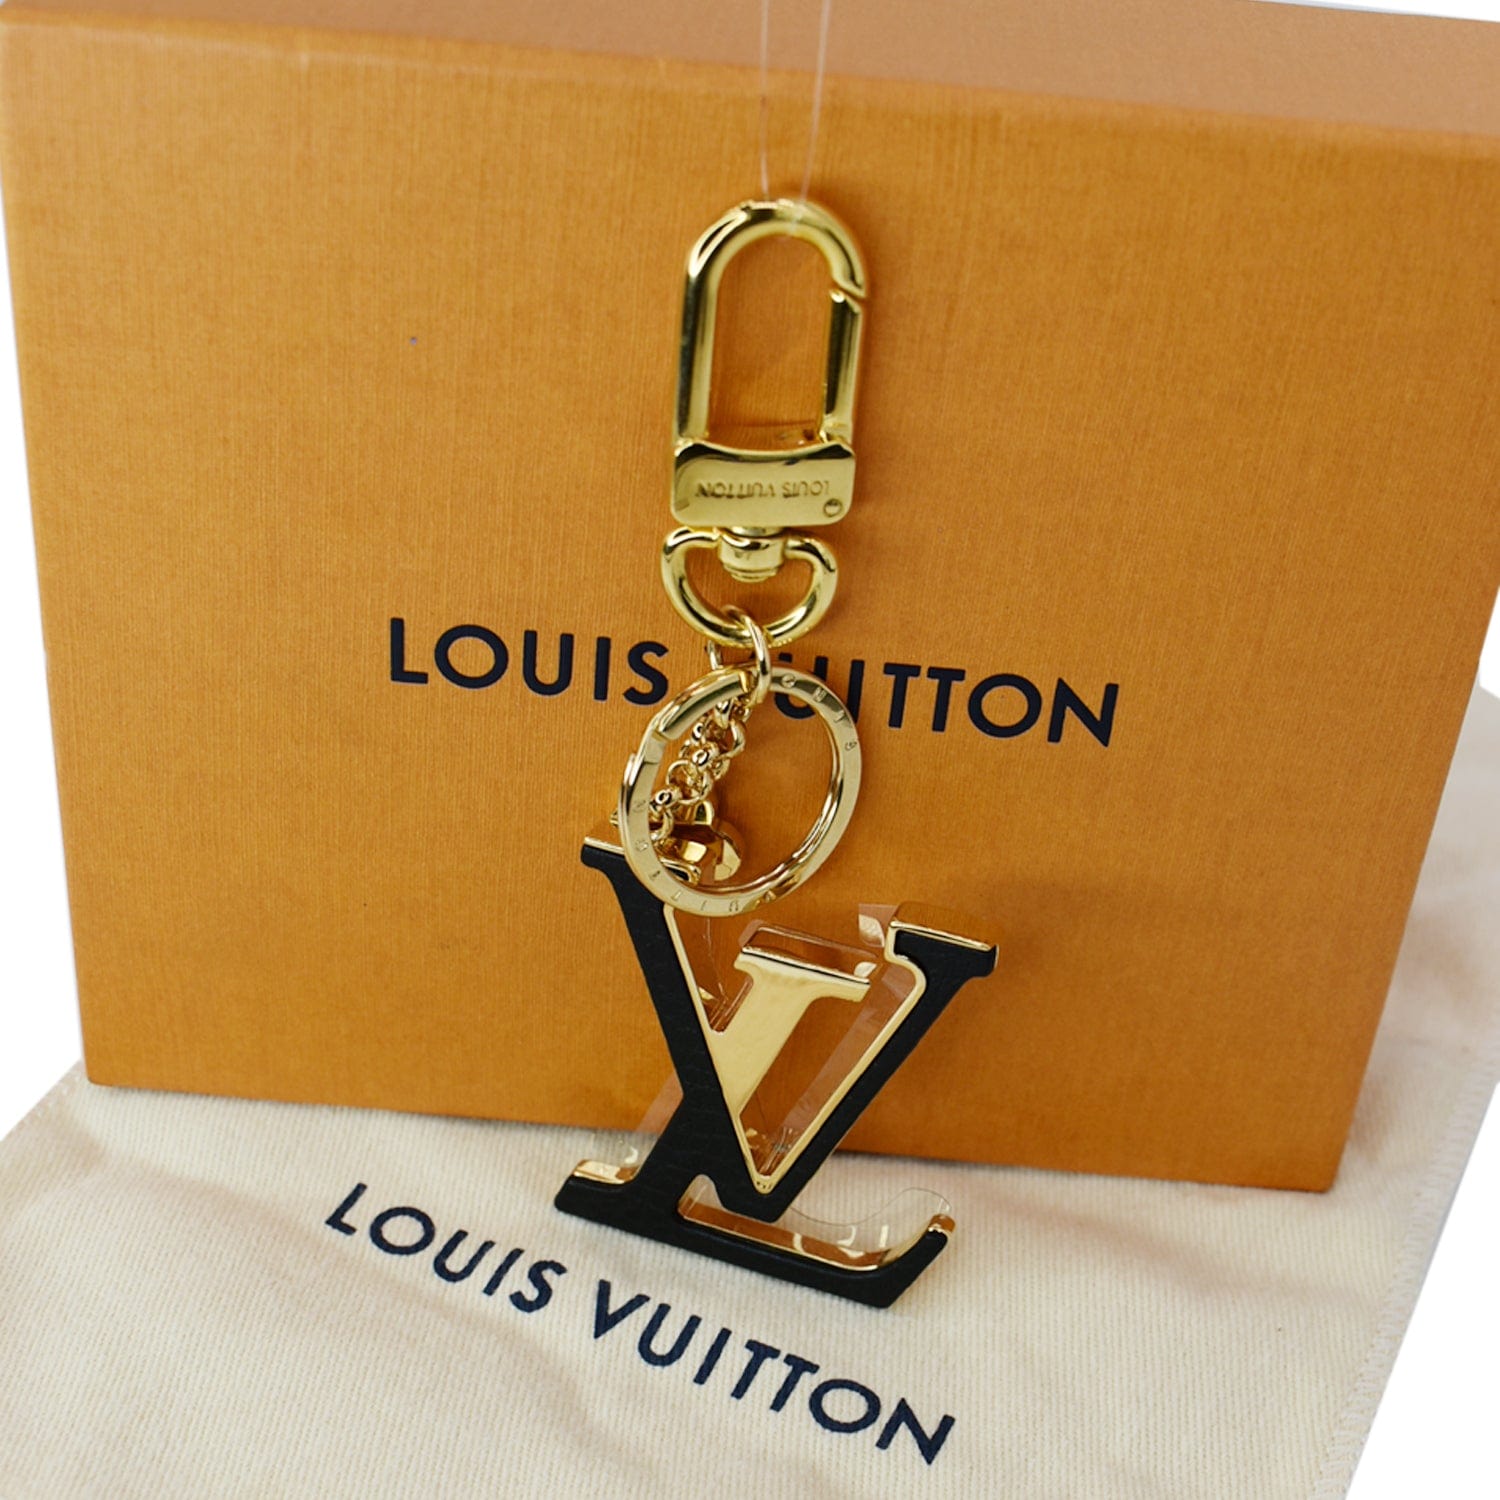 Shop Louis Vuitton Leather Logo Keychains & Bag Charms by